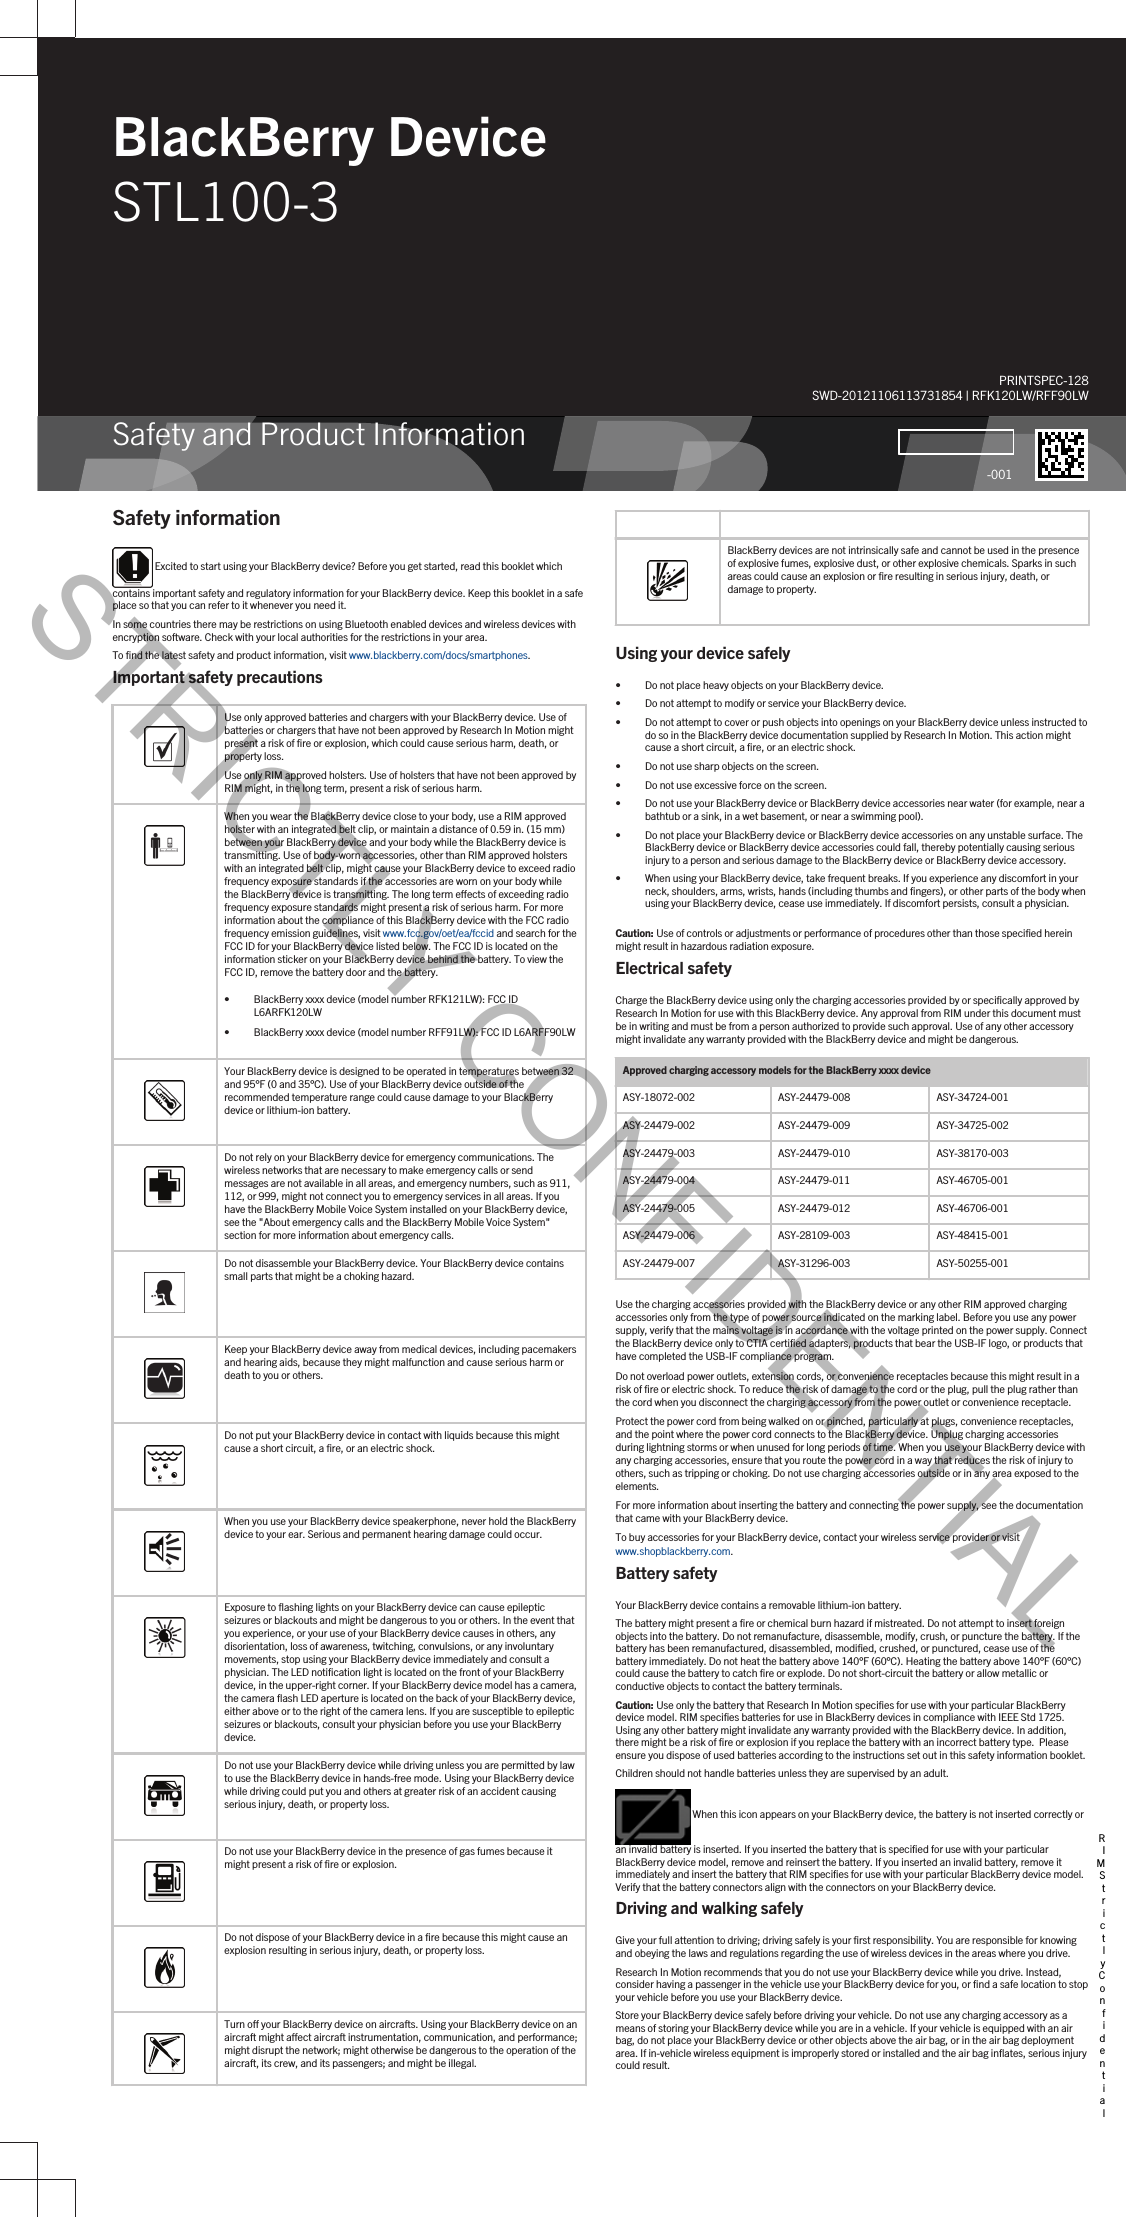 BlackBerry DeviceSTL100-3Safety and Product InformationPRINTSPEC-128SWD-20121106113731854 | RFK120LW/RFF90LW-001Safety information Excited to start using your BlackBerry device? Before you get started, read this booklet which contains important safety and regulatory information for your BlackBerry device. Keep this booklet in a safe place so that you can refer to it whenever you need it.In some countries there may be restrictions on using Bluetooth enabled devices and wireless devices with encryption software. Check with your local authorities for the restrictions in your area.To find the latest safety and product information, visit www.blackberry.com/docs/smartphones.Important safety precautions  Use only approved batteries and chargers with your BlackBerry device. Use of batteries or chargers that have not been approved by Research In Motion might present a risk of fire or explosion, which could cause serious harm, death, or property loss.Use only RIM approved holsters. Use of holsters that have not been approved by RIM might, in the long term, present a risk of serious harm.  When you wear the BlackBerry device close to your body, use a RIM approved holster with an integrated belt clip, or maintain a distance of 0.59 in. (15 mm) between your BlackBerry device and your body while the BlackBerry device is transmitting. Use of body-worn accessories, other than RIM approved holsters with an integrated belt clip, might cause your BlackBerry device to exceed radio frequency exposure standards if the accessories are worn on your body while the BlackBerry device is transmitting. The long term effects of exceeding radio frequency exposure standards might present a risk of serious harm. For more information about the compliance of this BlackBerry device with the FCC radio frequency emission guidelines, visit www.fcc.gov/oet/ea/fccid and search for the FCC ID for your BlackBerry device listed below. The FCC ID is located on the information sticker on your BlackBerry device behind the battery. To view the FCC ID, remove the battery door and the battery.• BlackBerry xxxx device (model number RFK121LW): FCC ID L6ARFK120LW• BlackBerry xxxx device (model number RFF91LW): FCC ID L6ARFF90LW  Your BlackBerry device is designed to be operated in temperatures between 32 and 95°F (0 and 35°C). Use of your BlackBerry device outside of the recommended temperature range could cause damage to your BlackBerry device or lithium-ion battery.  Do not rely on your BlackBerry device for emergency communications. The wireless networks that are necessary to make emergency calls or send messages are not available in all areas, and emergency numbers, such as 911, 112, or 999, might not connect you to emergency services in all areas. If you have the BlackBerry Mobile Voice System installed on your BlackBerry device, see the &quot;About emergency calls and the BlackBerry Mobile Voice System&quot; section for more information about emergency calls.  Do not disassemble your BlackBerry device. Your BlackBerry device contains small parts that might be a choking hazard.  Keep your BlackBerry device away from medical devices, including pacemakers and hearing aids, because they might malfunction and cause serious harm or death to you or others.  Do not put your BlackBerry device in contact with liquids because this might cause a short circuit, a fire, or an electric shock.  When you use your BlackBerry device speakerphone, never hold the BlackBerry device to your ear. Serious and permanent hearing damage could occur.  Exposure to flashing lights on your BlackBerry device can cause epileptic seizures or blackouts and might be dangerous to you or others. In the event that you experience, or your use of your BlackBerry device causes in others, any disorientation, loss of awareness, twitching, convulsions, or any involuntary movements, stop using your BlackBerry device immediately and consult a physician. The LED notification light is located on the front of your BlackBerry device, in the upper-right corner. If your BlackBerry device model has a camera, the camera flash LED aperture is located on the back of your BlackBerry device, either above or to the right of the camera lens. If you are susceptible to epileptic seizures or blackouts, consult your physician before you use your BlackBerry device.  Do not use your BlackBerry device while driving unless you are permitted by law to use the BlackBerry device in hands-free mode. Using your BlackBerry device while driving could put you and others at greater risk of an accident causing serious injury, death, or property loss.  Do not use your BlackBerry device in the presence of gas fumes because it might present a risk of fire or explosion.  Do not dispose of your BlackBerry device in a fire because this might cause an explosion resulting in serious injury, death, or property loss. Turn off your BlackBerry device on aircrafts. Using your BlackBerry device on an aircraft might affect aircraft instrumentation, communication, and performance; might disrupt the network; might otherwise be dangerous to the operation of the aircraft, its crew, and its passengers; and might be illegal.   BlackBerry devices are not intrinsically safe and cannot be used in the presence of explosive fumes, explosive dust, or other explosive chemicals. Sparks in such areas could cause an explosion or fire resulting in serious injury, death, or damage to property.Using your device safely• Do not place heavy objects on your BlackBerry device.• Do not attempt to modify or service your BlackBerry device.• Do not attempt to cover or push objects into openings on your BlackBerry device unless instructed to do so in the BlackBerry device documentation supplied by Research In Motion. This action might cause a short circuit, a fire, or an electric shock.• Do not use sharp objects on the screen.• Do not use excessive force on the screen.• Do not use your BlackBerry device or BlackBerry device accessories near water (for example, near a bathtub or a sink, in a wet basement, or near a swimming pool).• Do not place your BlackBerry device or BlackBerry device accessories on any unstable surface. The BlackBerry device or BlackBerry device accessories could fall, thereby potentially causing serious injury to a person and serious damage to the BlackBerry device or BlackBerry device accessory.• When using your BlackBerry device, take frequent breaks. If you experience any discomfort in your neck, shoulders, arms, wrists, hands (including thumbs and fingers), or other parts of the body when using your BlackBerry device, cease use immediately. If discomfort persists, consult a physician.Caution: Use of controls or adjustments or performance of procedures other than those specified herein might result in hazardous radiation exposure.Electrical safetyCharge the BlackBerry device using only the charging accessories provided by or specifically approved by Research In Motion for use with this BlackBerry device. Any approval from RIM under this document must be in writing and must be from a person authorized to provide such approval. Use of any other accessory might invalidate any warranty provided with the BlackBerry device and might be dangerous.Approved charging accessory models for the BlackBerry xxxx deviceASY-18072-002 ASY-24479-008 ASY-34724-001ASY-24479-002 ASY-24479-009 ASY-34725-002ASY-24479-003 ASY-24479-010 ASY-38170-003ASY-24479-004 ASY-24479-011 ASY-46705-001ASY-24479-005 ASY-24479-012 ASY-46706-001ASY-24479-006 ASY-28109-003 ASY-48415-001ASY-24479-007 ASY-31296-003 ASY-50255-001Use the charging accessories provided with the BlackBerry device or any other RIM approved charging accessories only from the type of power source indicated on the marking label. Before you use any power supply, verify that the mains voltage is in accordance with the voltage printed on the power supply. Connect the BlackBerry device only to CTIA certified adapters, products that bear the USB-IF logo, or products that have completed the USB-IF compliance program.Do not overload power outlets, extension cords, or convenience receptacles because this might result in a risk of fire or electric shock. To reduce the risk of damage to the cord or the plug, pull the plug rather than the cord when you disconnect the charging accessory from the power outlet or convenience receptacle.Protect the power cord from being walked on or pinched, particularly at plugs, convenience receptacles, and the point where the power cord connects to the BlackBerry device. Unplug charging accessories during lightning storms or when unused for long periods of time. When you use your BlackBerry device with any charging accessories, ensure that you route the power cord in a way that reduces the risk of injury to others, such as tripping or choking. Do not use charging accessories outside or in any area exposed to the elements.For more information about inserting the battery and connecting the power supply, see the documentation that came with your BlackBerry device.To buy accessories for your BlackBerry device, contact your wireless service provider or visit www.shopblackberry.com.Battery safetyYour BlackBerry device contains a removable lithium-ion battery.The battery might present a fire or chemical burn hazard if mistreated. Do not attempt to insert foreign objects into the battery. Do not remanufacture, disassemble, modify, crush, or puncture the battery. If the battery has been remanufactured, disassembled, modified, crushed, or punctured, cease use of the battery immediately. Do not heat the battery above 140°F (60°C). Heating the battery above 140°F (60°C) could cause the battery to catch fire or explode. Do not short-circuit the battery or allow metallic or conductive objects to contact the battery terminals.Caution: Use only the battery that Research In Motion specifies for use with your particular BlackBerry device model. RIM specifies batteries for use in BlackBerry devices in compliance with IEEE Std 1725. Using any other battery might invalidate any warranty provided with the BlackBerry device. In addition, there might be a risk of fire or explosion if you replace the battery with an incorrect battery type.  Please ensure you dispose of used batteries according to the instructions set out in this safety information booklet.Children should not handle batteries unless they are supervised by an adult. When this icon appears on your BlackBerry device, the battery is not inserted correctly or an invalid battery is inserted. If you inserted the battery that is specified for use with your particular BlackBerry device model, remove and reinsert the battery. If you inserted an invalid battery, remove it immediately and insert the battery that RIM specifies for use with your particular BlackBerry device model. Verify that the battery connectors align with the connectors on your BlackBerry device.Driving and walking safelyGive your full attention to driving; driving safely is your first responsibility. You are responsible for knowing and obeying the laws and regulations regarding the use of wireless devices in the areas where you drive.Research In Motion recommends that you do not use your BlackBerry device while you drive. Instead, consider having a passenger in the vehicle use your BlackBerry device for you, or find a safe location to stop your vehicle before you use your BlackBerry device.Store your BlackBerry device safely before driving your vehicle. Do not use any charging accessory as a means of storing your BlackBerry device while you are in a vehicle. If your vehicle is equipped with an air bag, do not place your BlackBerry device or other objects above the air bag, or in the air bag deployment area. If in-vehicle wireless equipment is improperly stored or installed and the air bag inflates, serious injury could result.RIM Strictly ConfidentialSTRICTLY CONFIDENTIAL